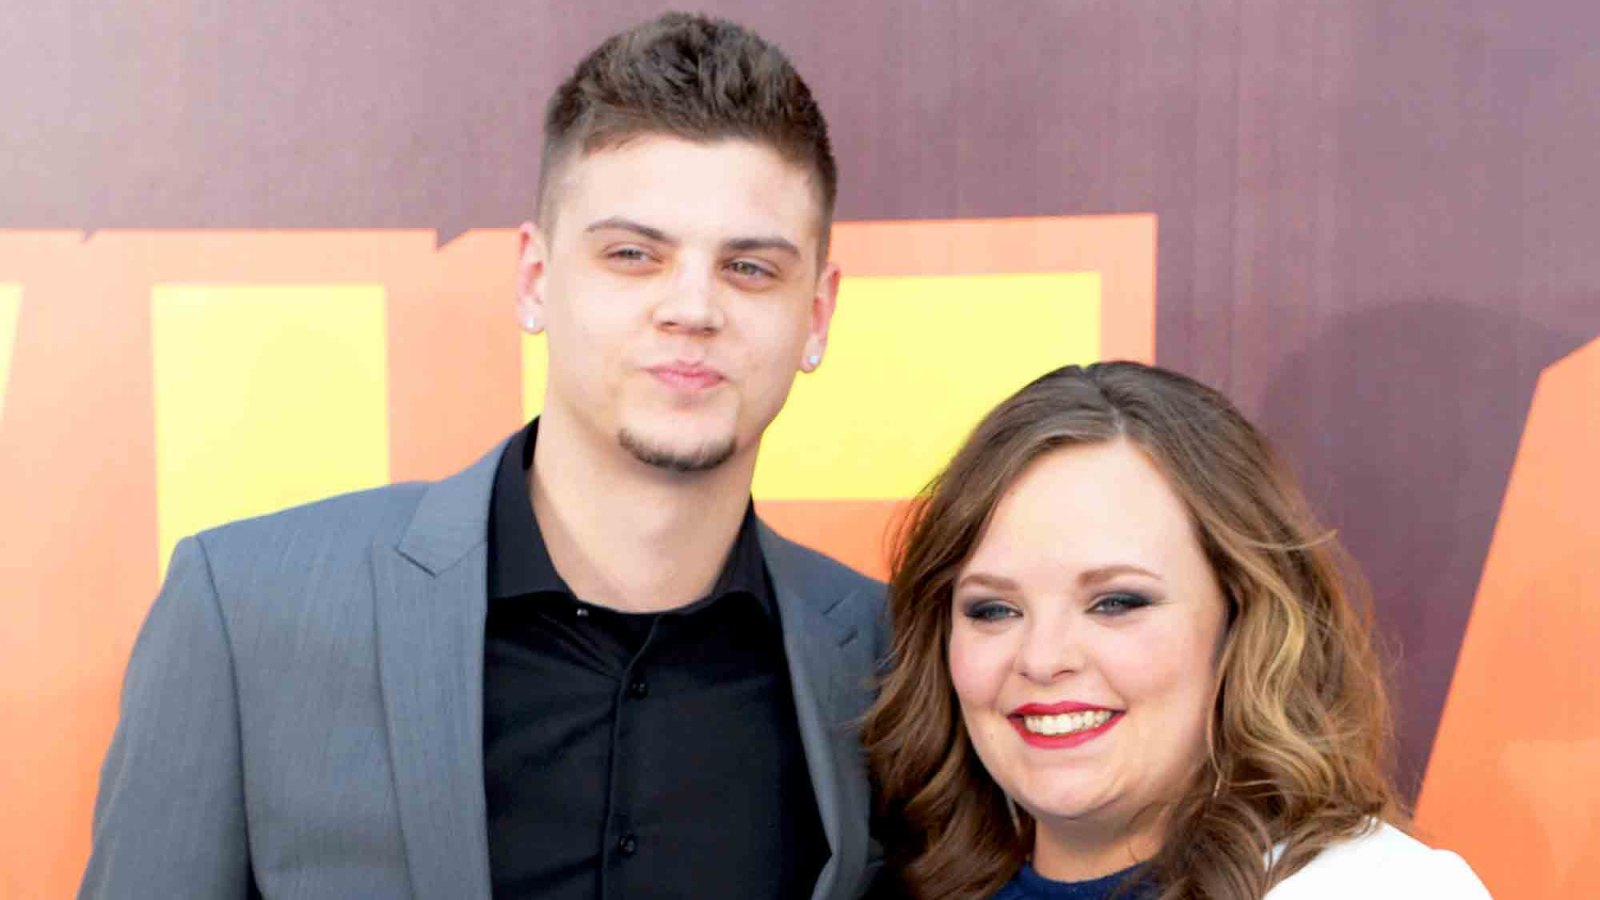 Tyler Baltierra and Catelynn Lowell attend The 2015 MTV Movie Awards at Nokia Theatre L.A. Live in Los Angeles, California.